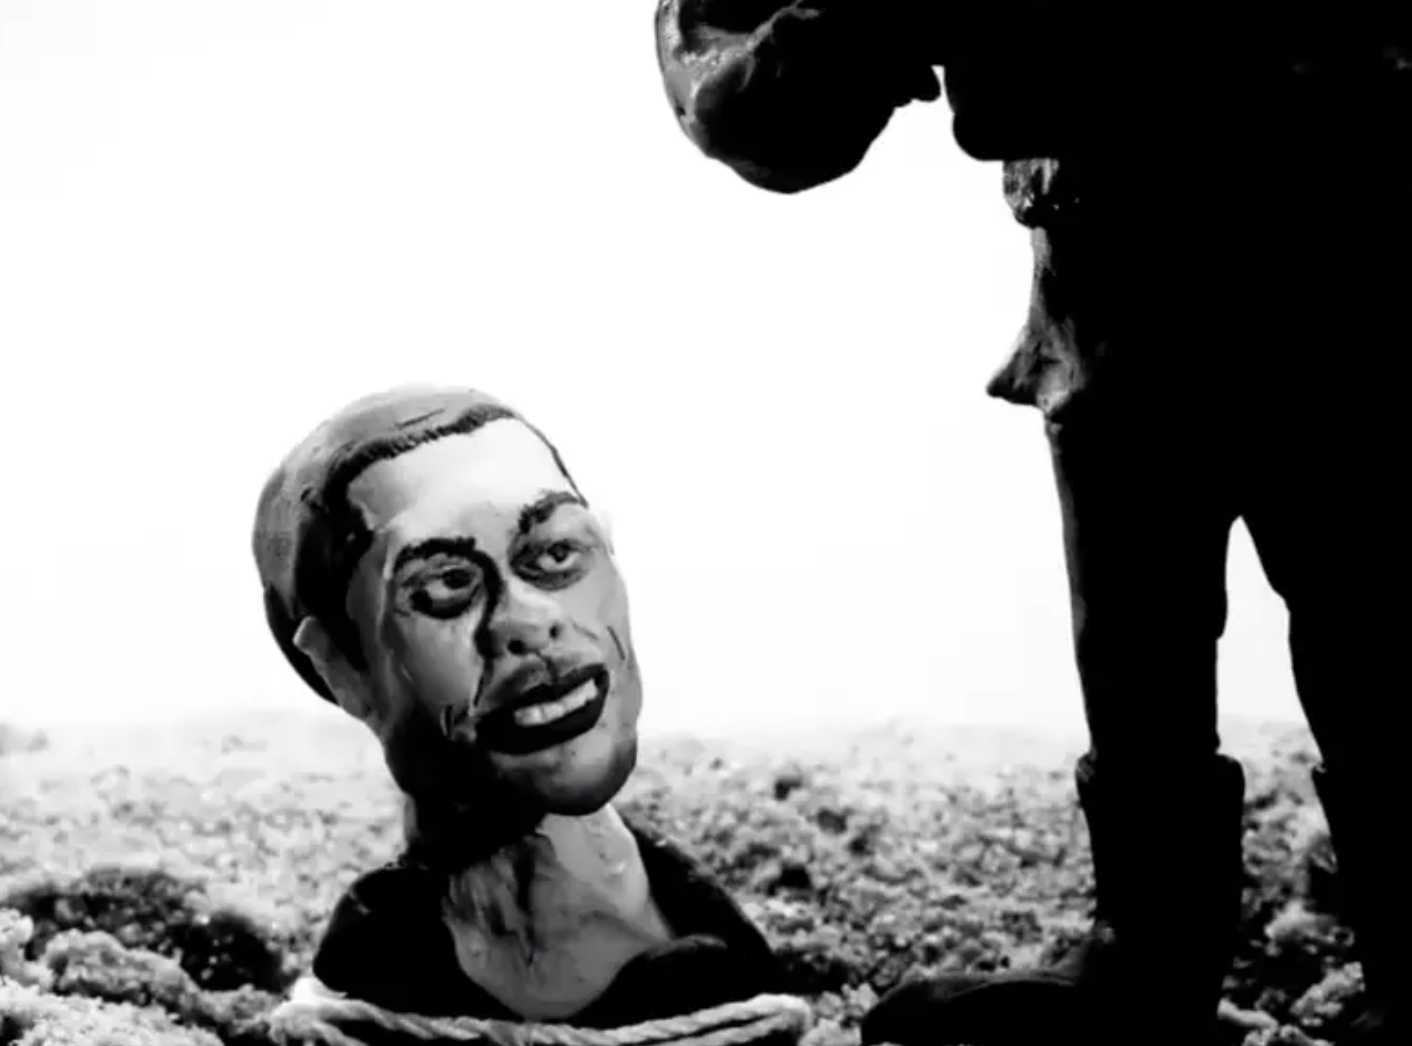 Footage from the video shows a clay figure of Pete Davidson buried up to his neck